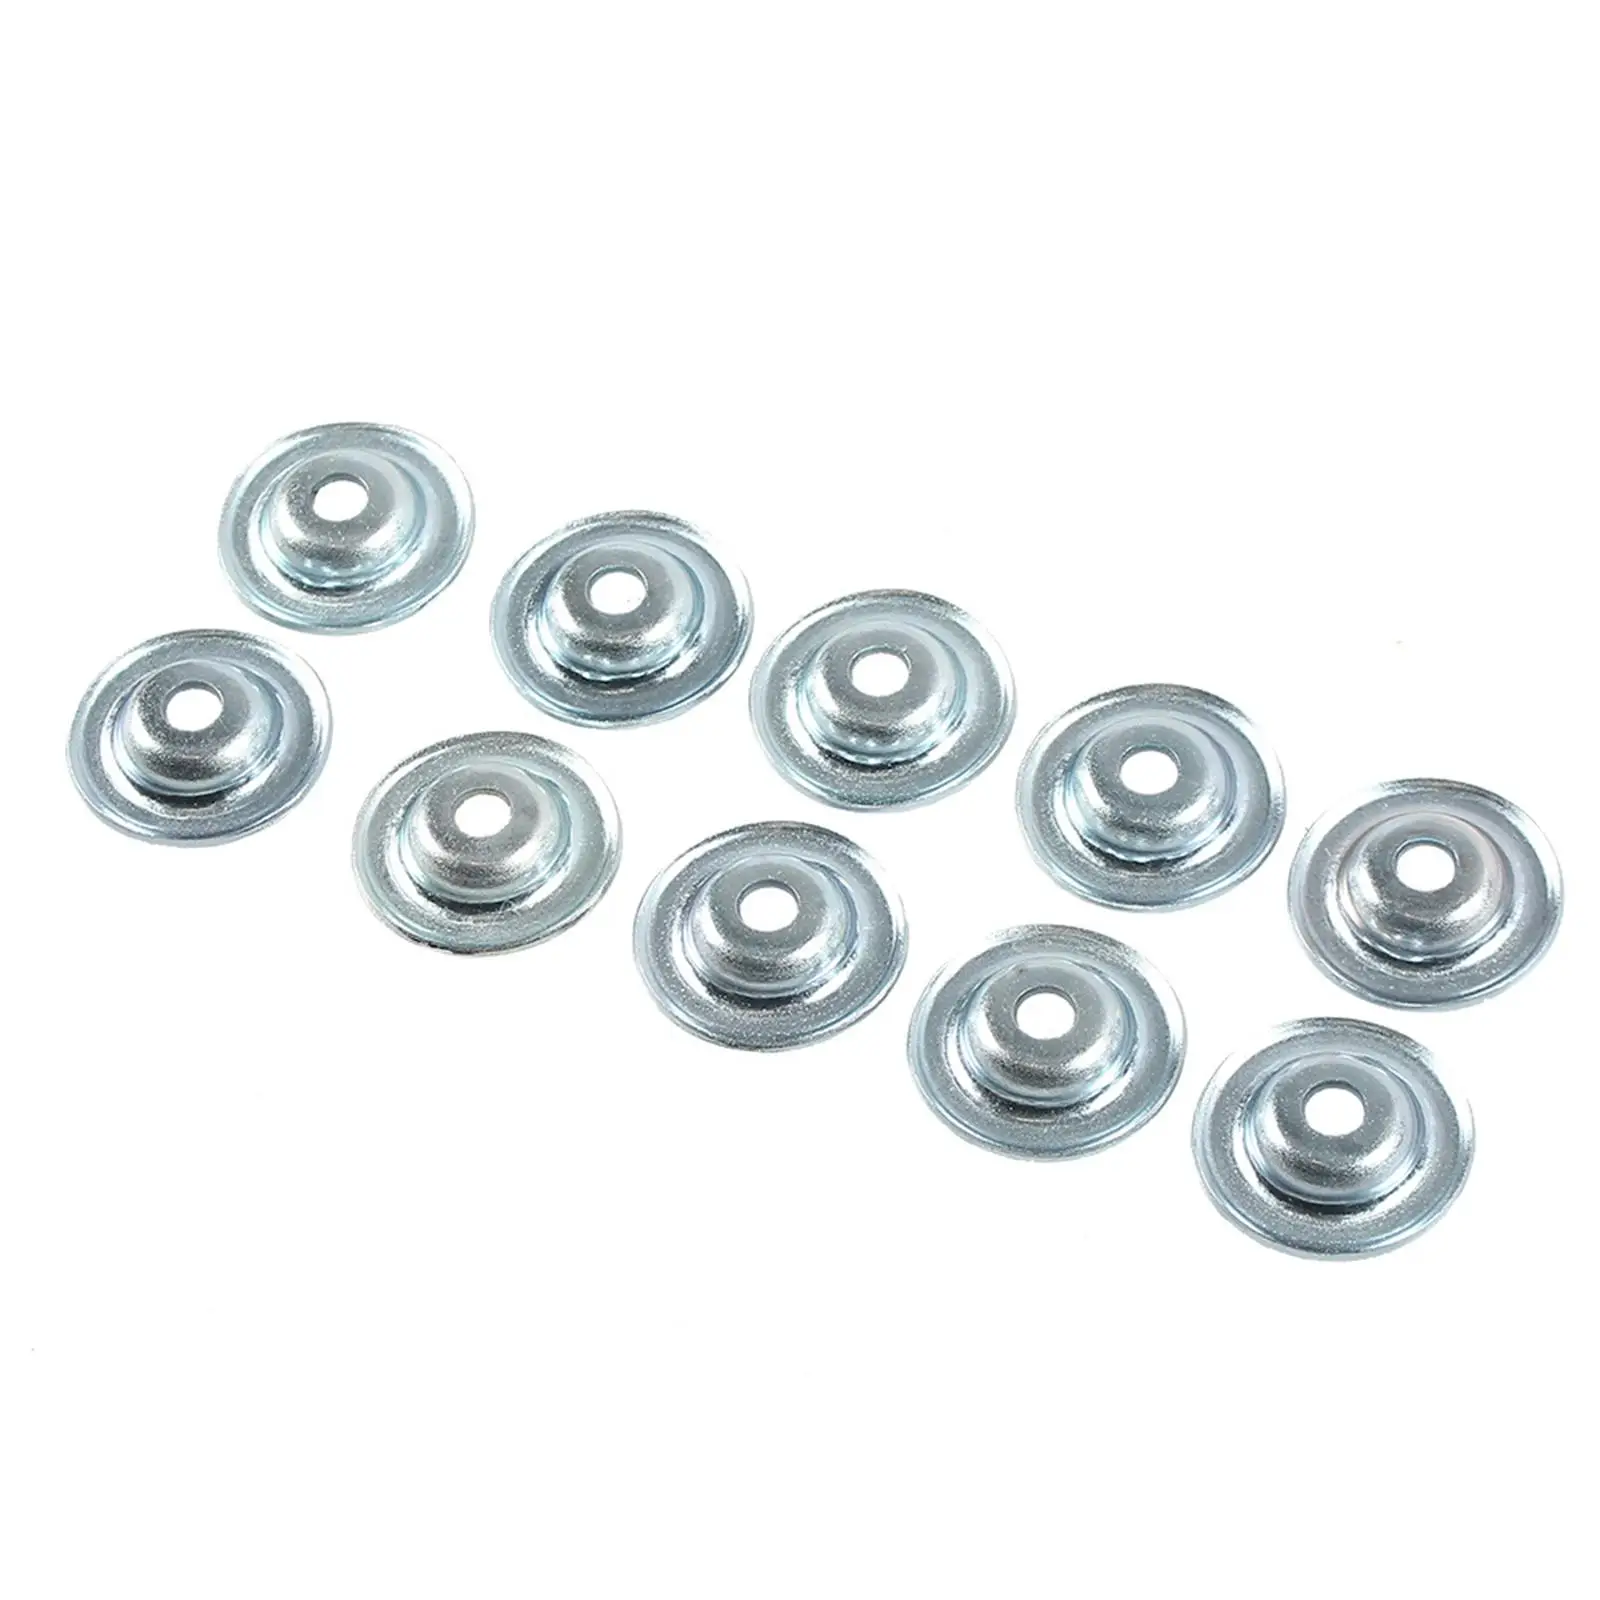 Washer  for UTV Non Skid 7556065 for RS1 RZR 500 570 Easy to Install Spare Parts Replacement Accessories